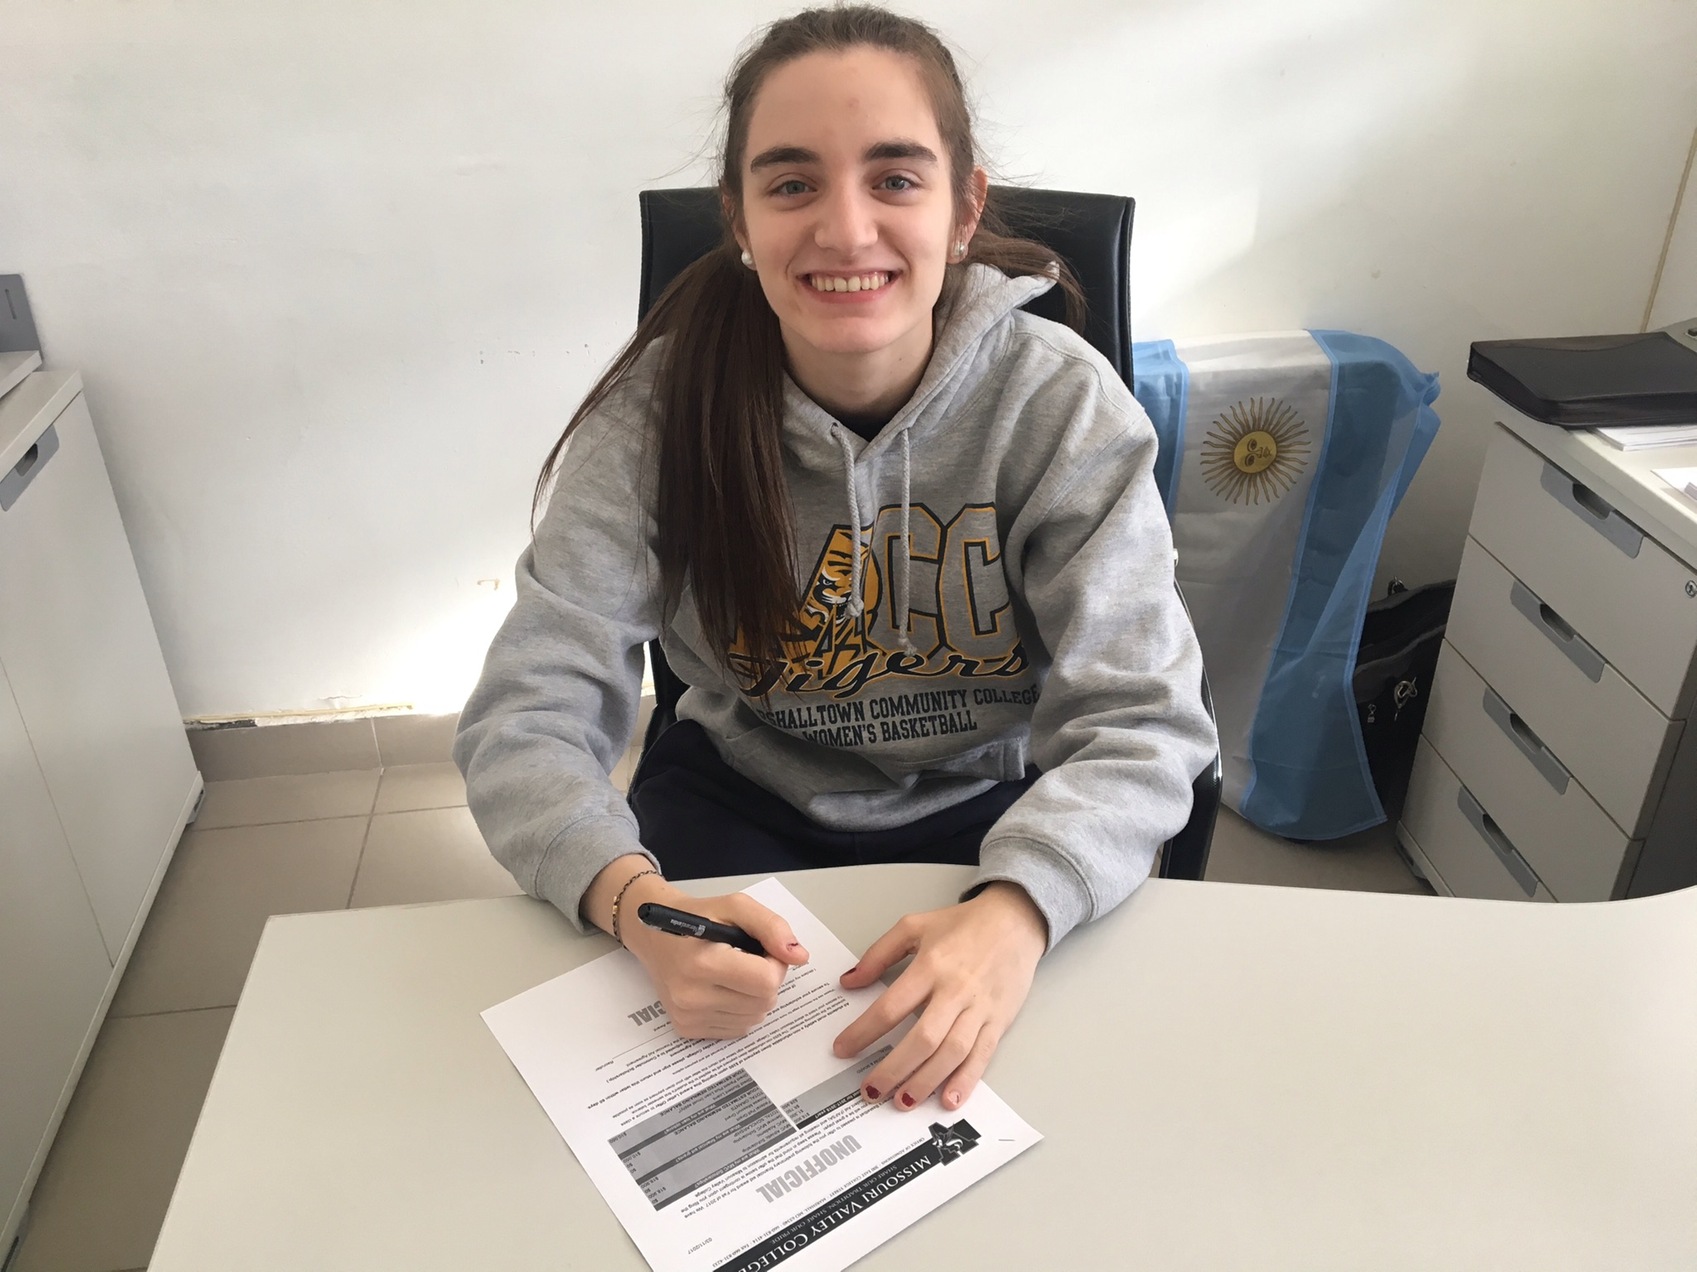 Barbara Araoz has signed a National Letter of Intent to play basketball  at Missouri Valley College next season